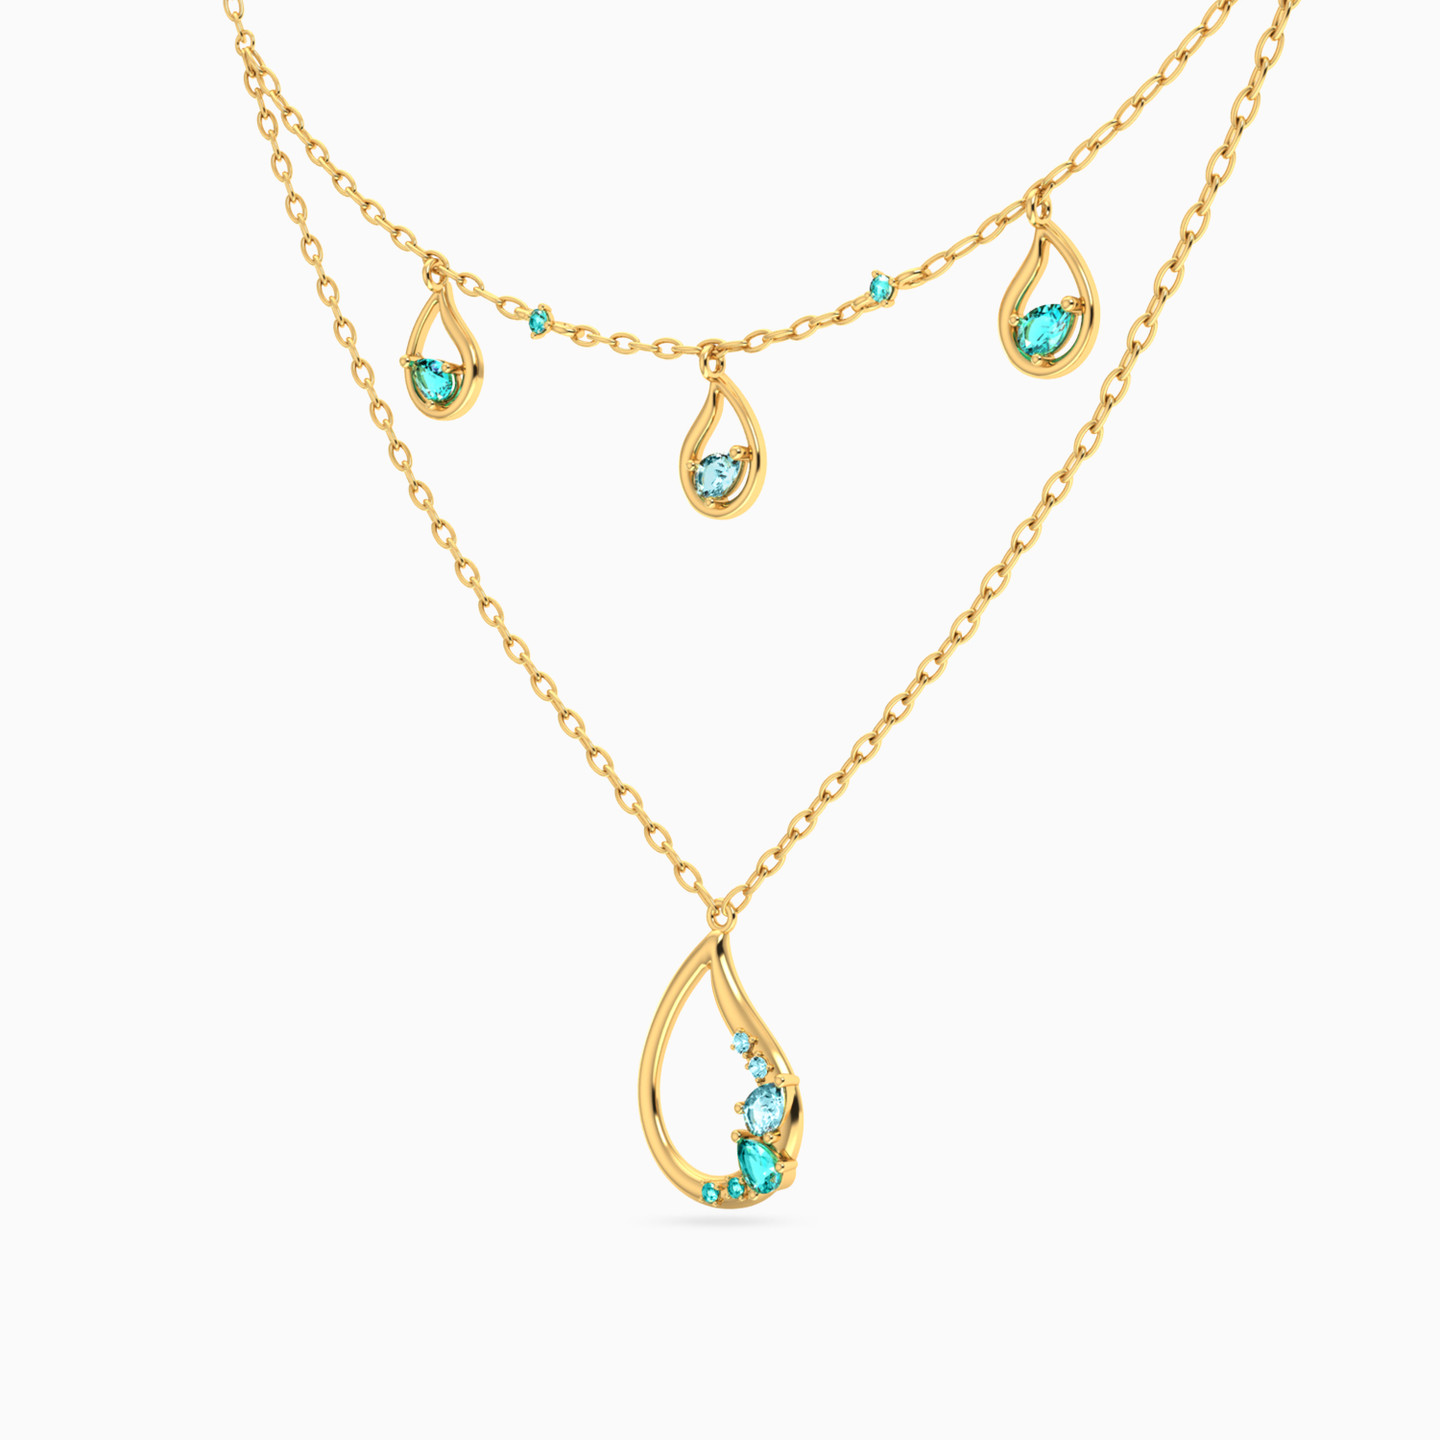 14K Gold Colored Stones Layered Necklace - 2